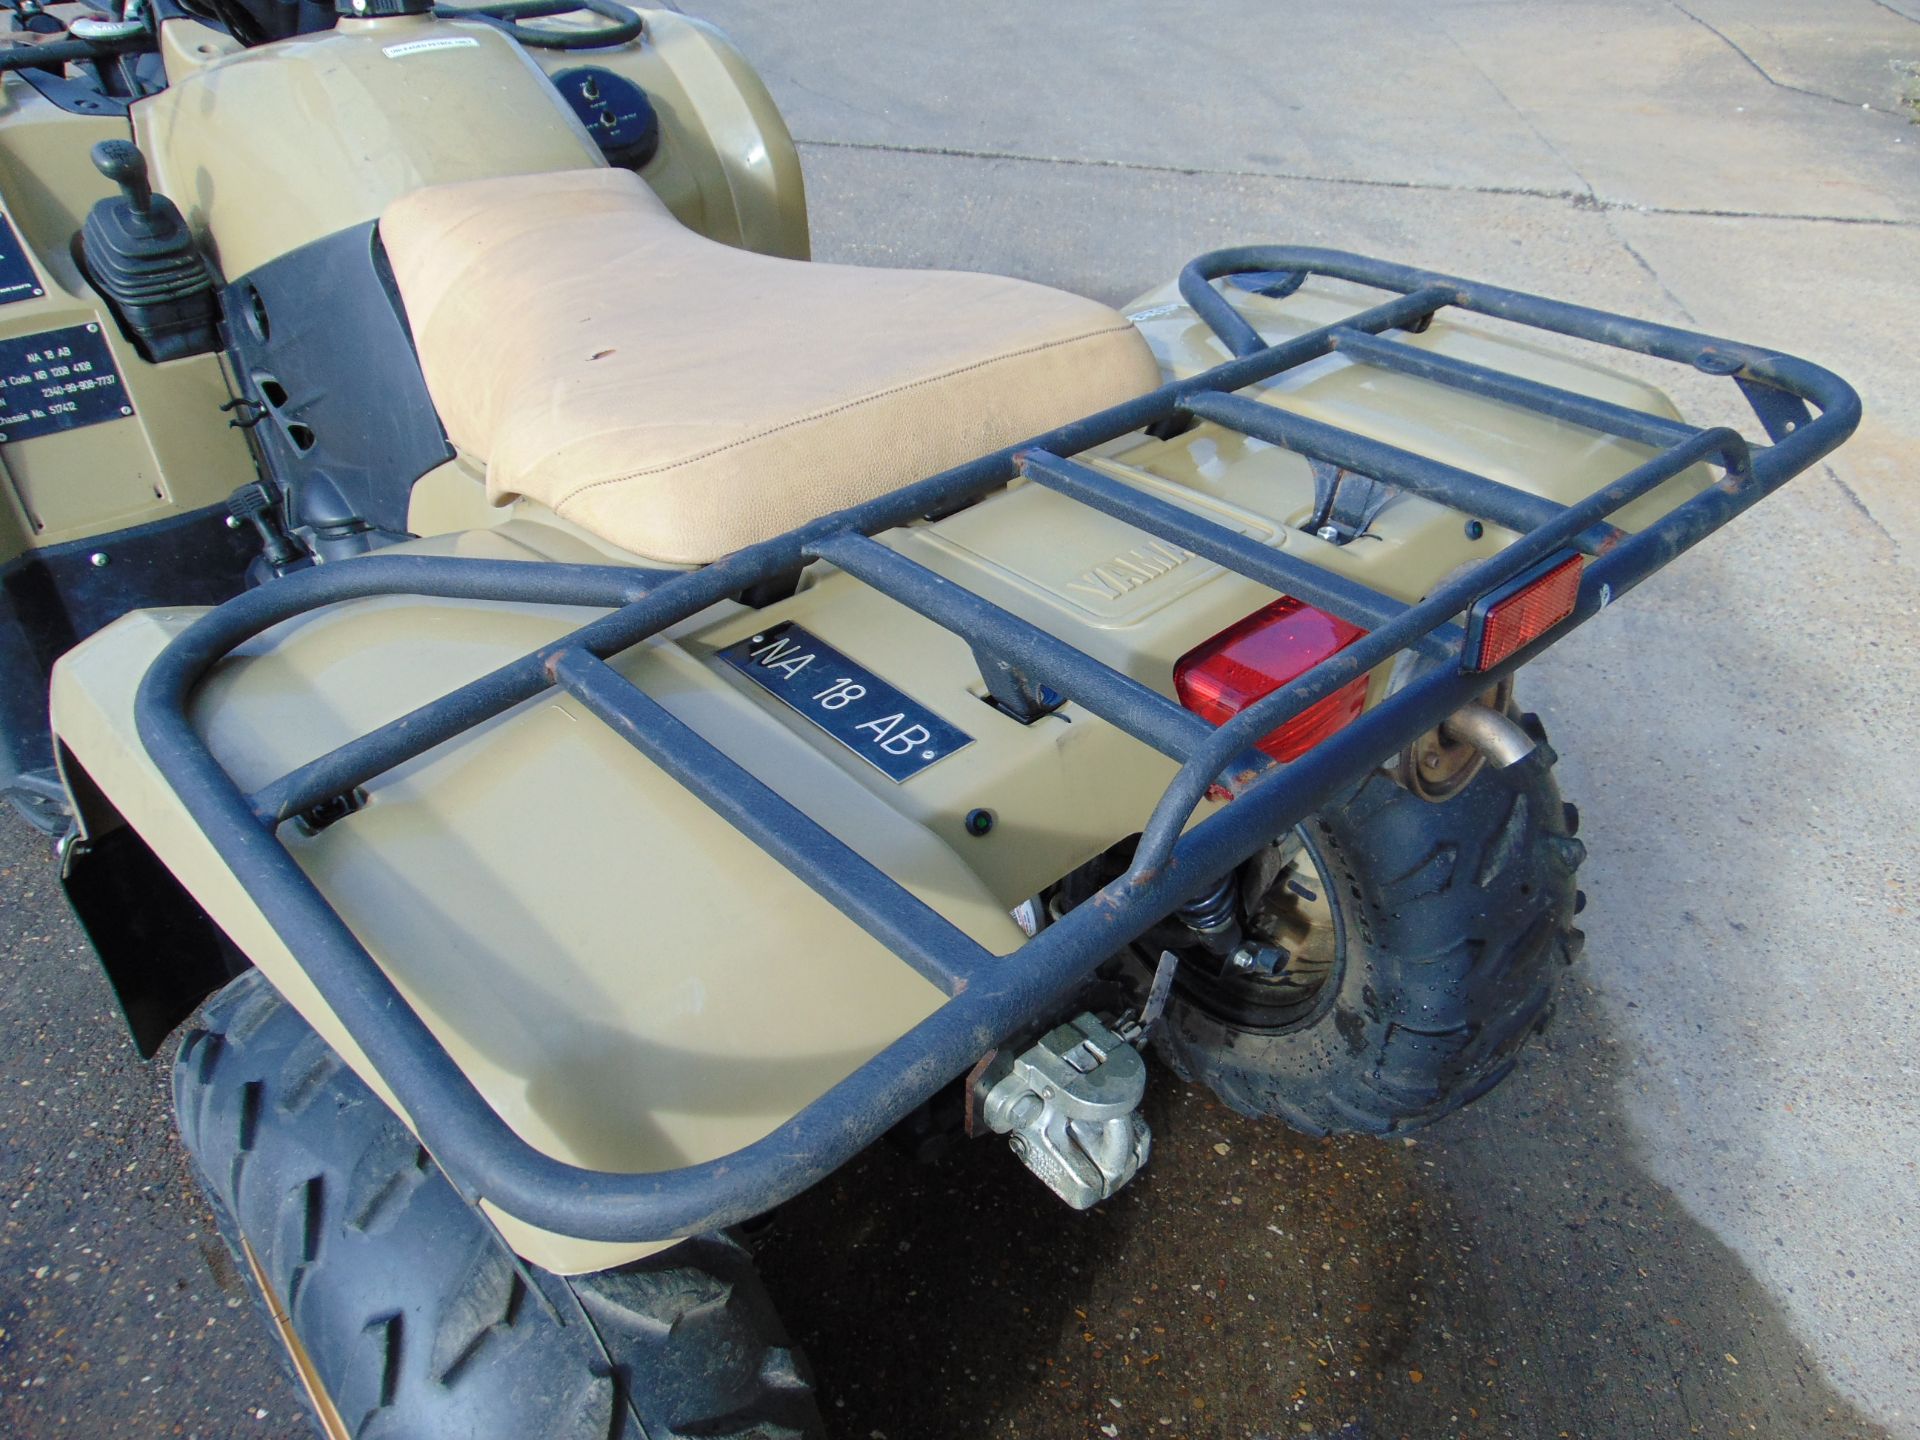 Military Specification Yamaha Grizzly 450 4 x 4 ATV Quad Bike ONLY 214 HOURS!!! - Image 22 of 22